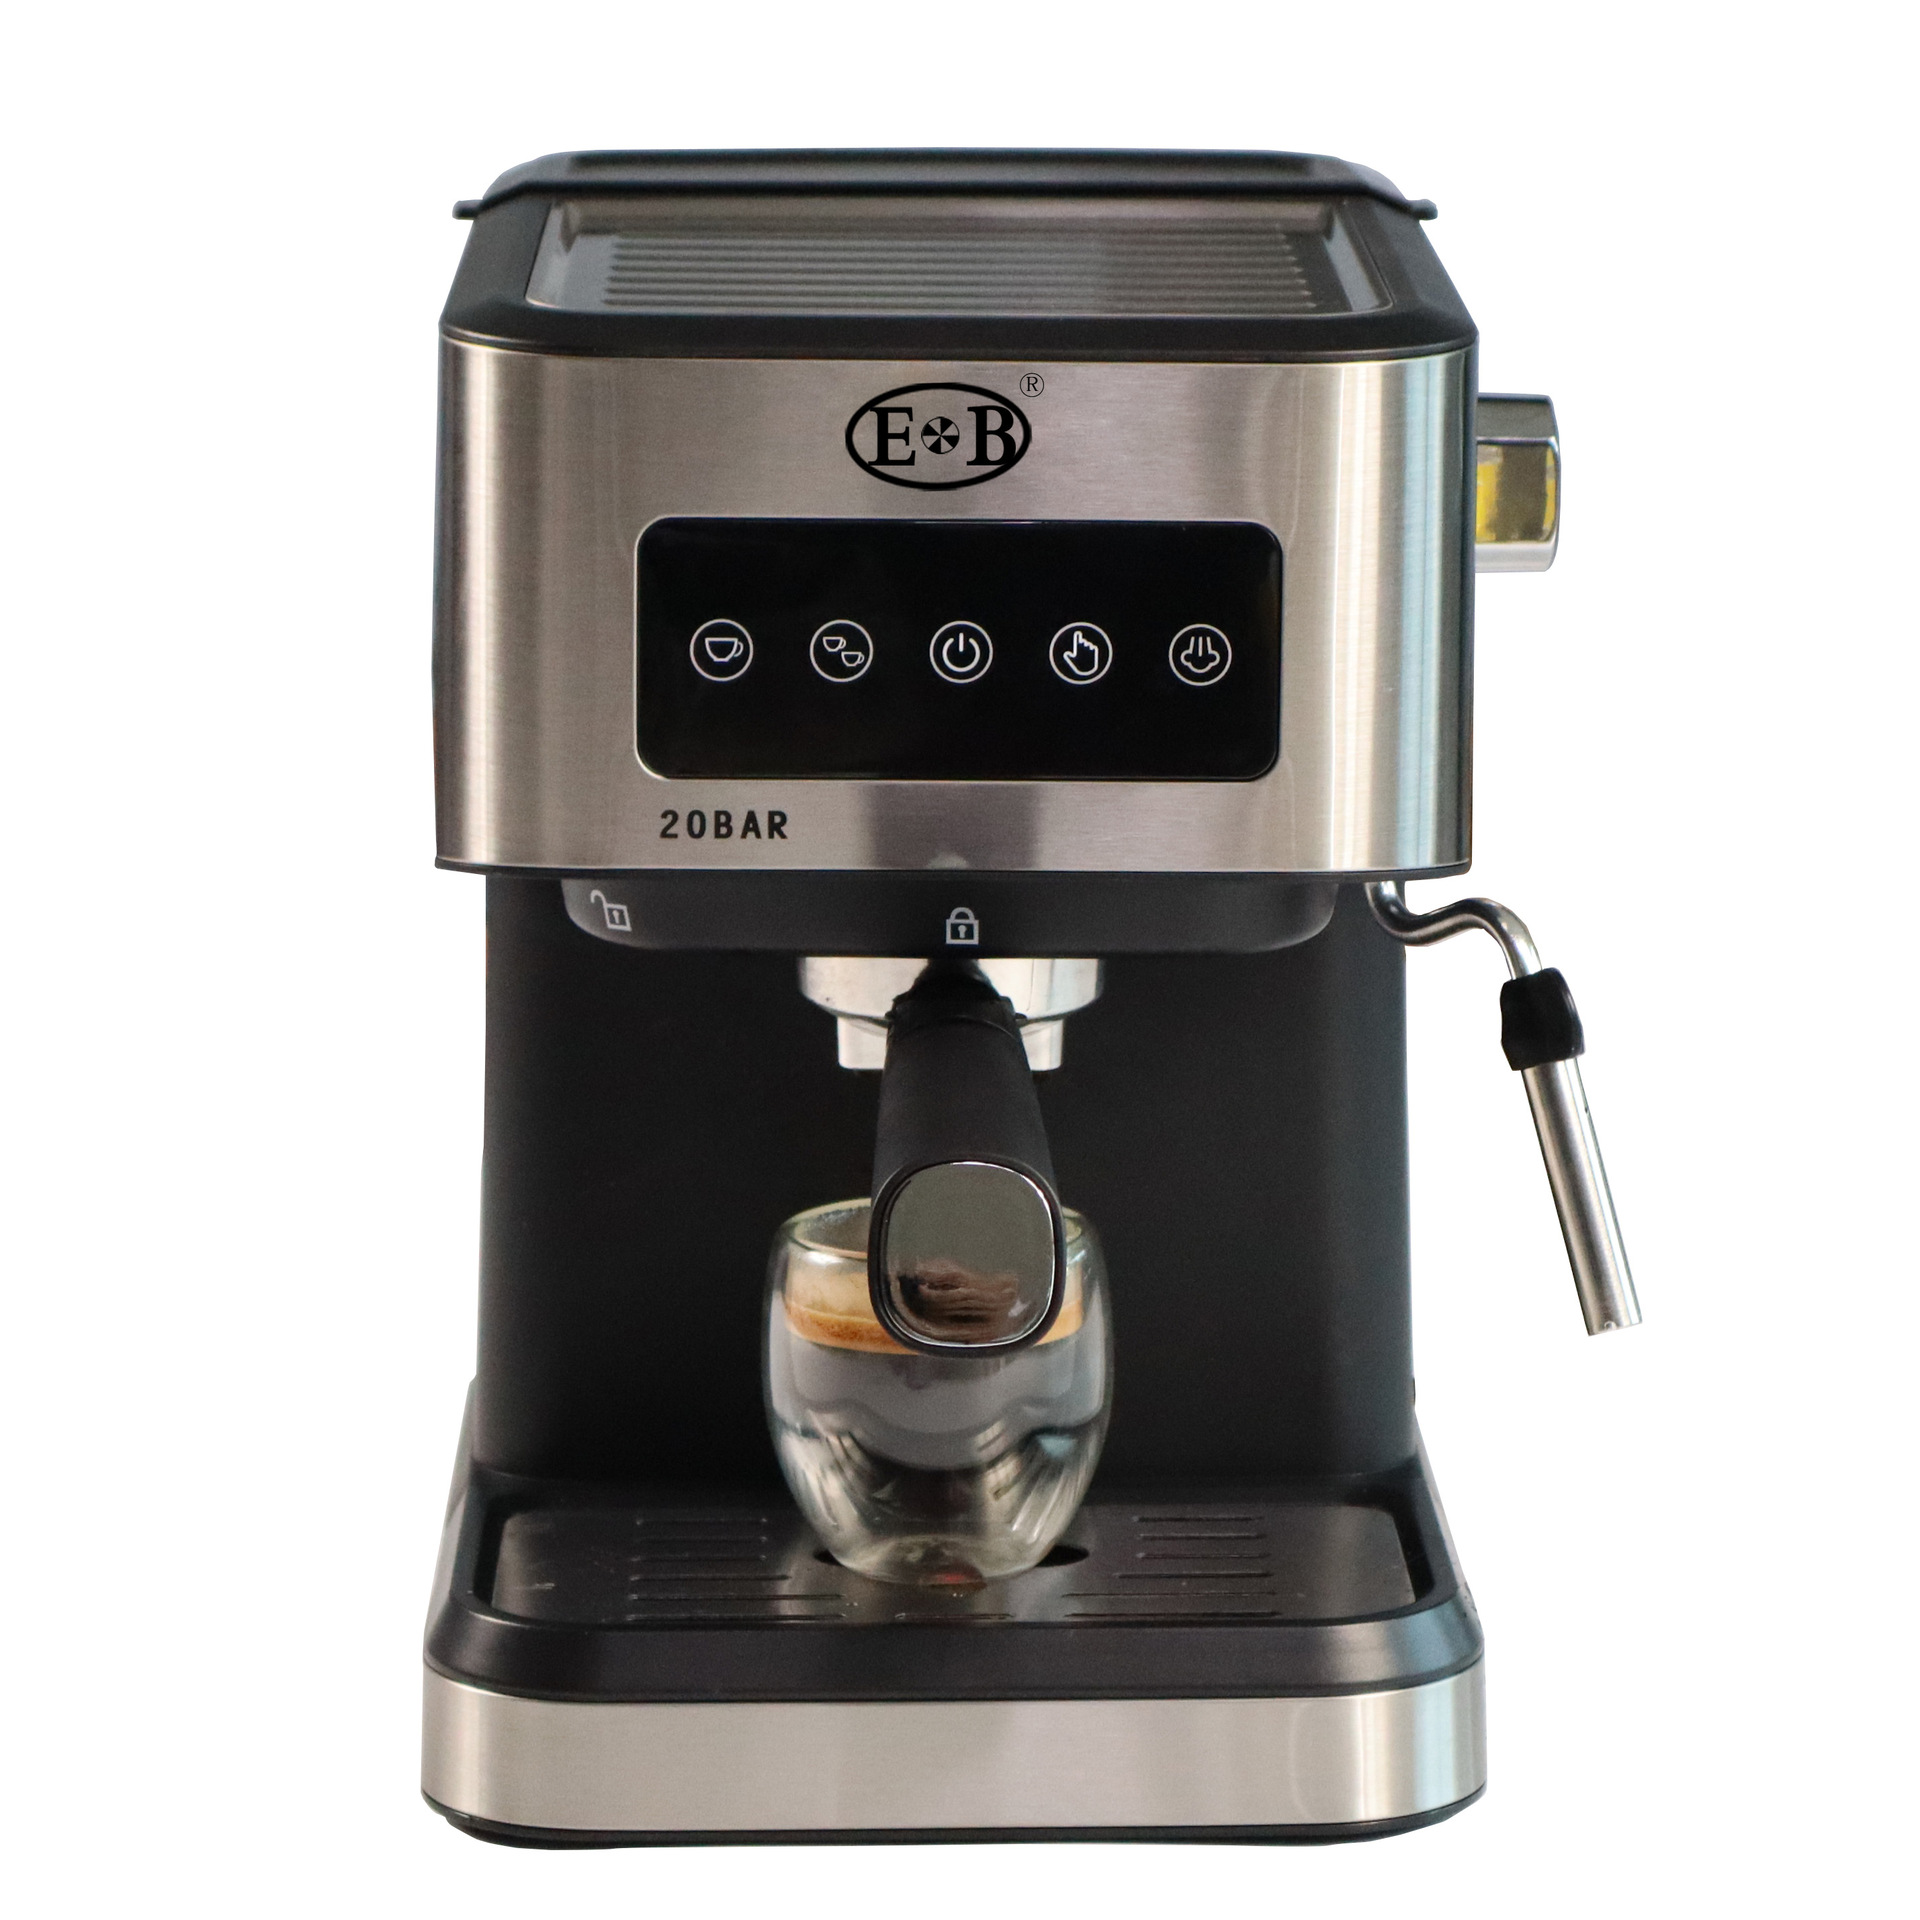 CM-3000Hot selling household coffee machine, small Italian semi-automatic110VOverseas milk foam can be made           6974865217504